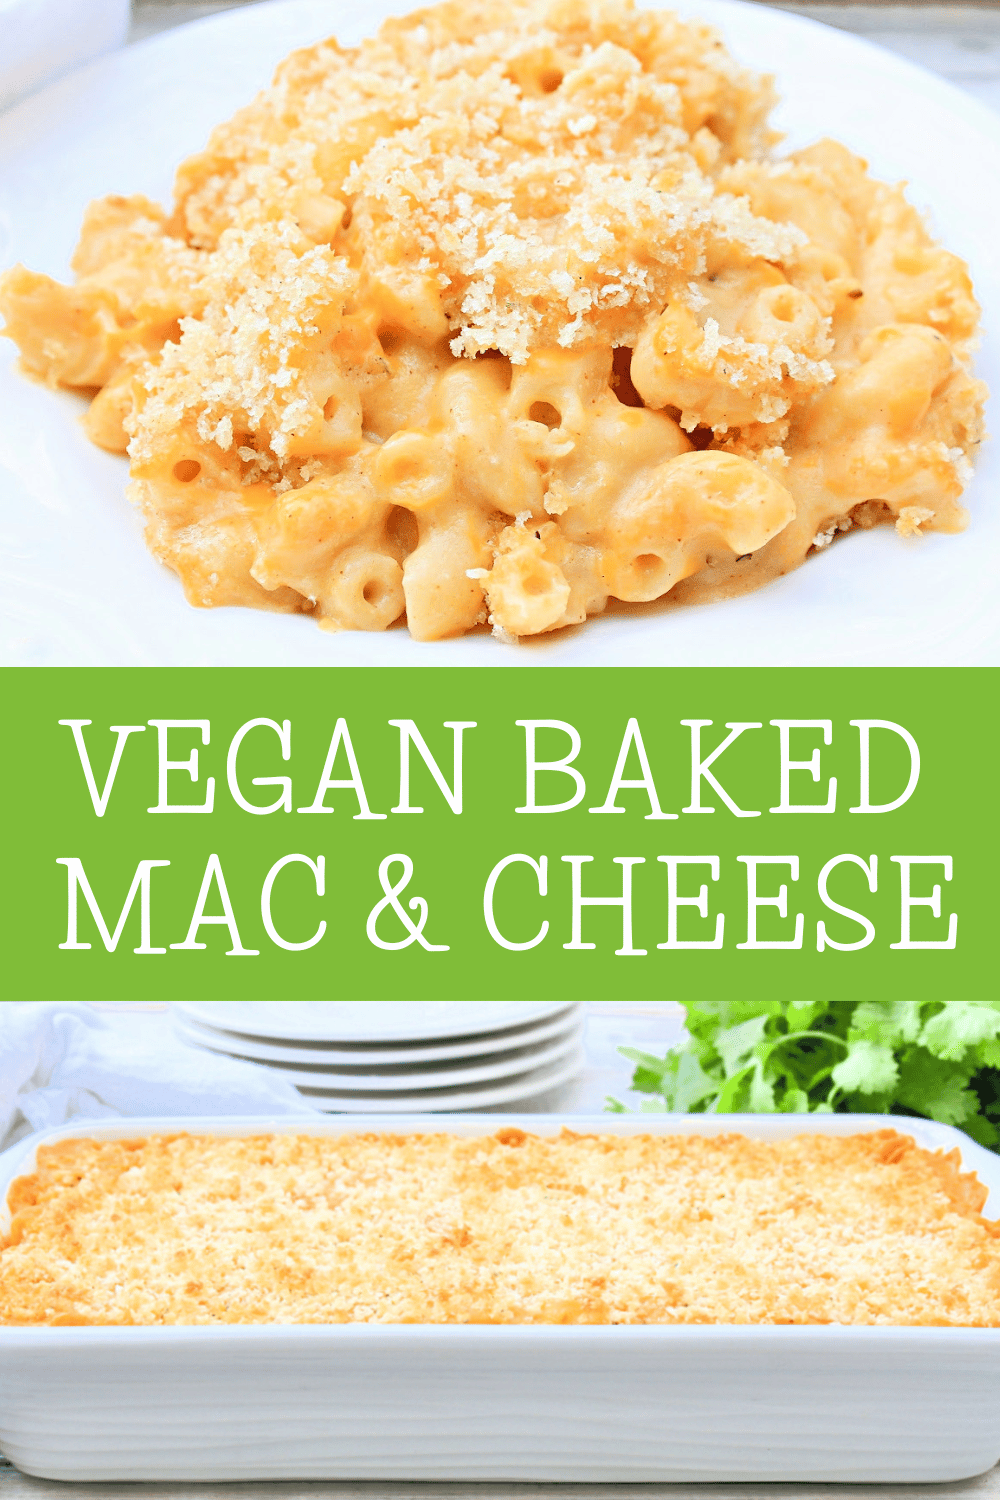 Baked Mac and Cheese ~ Kid-tested and approved! You're going to love this rich, indulgent, and deliciously dairy-free comfort food classic! via @thiswifecooks